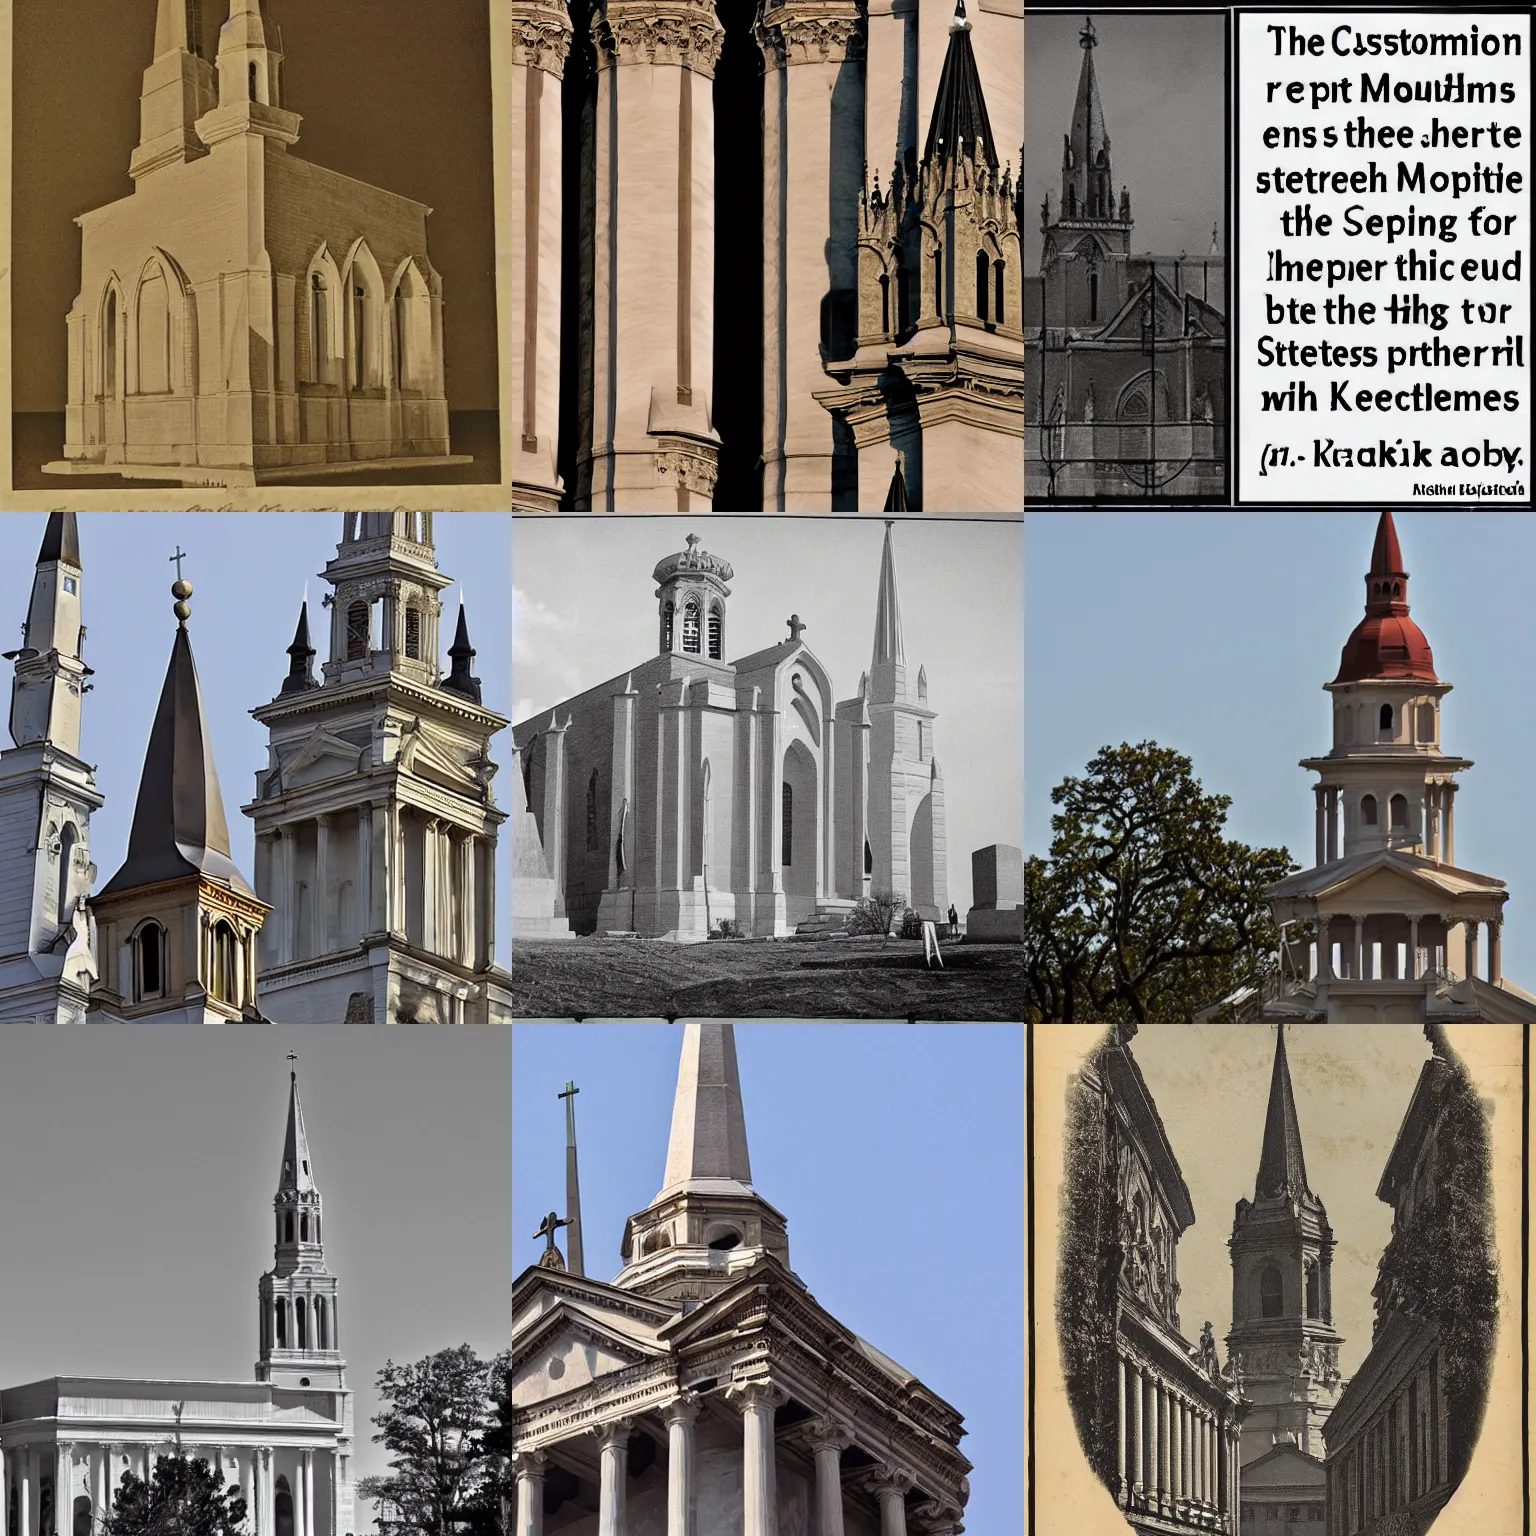 Prompt: The custom concern for the people Build up the monuments and steeples to wear out our eyes